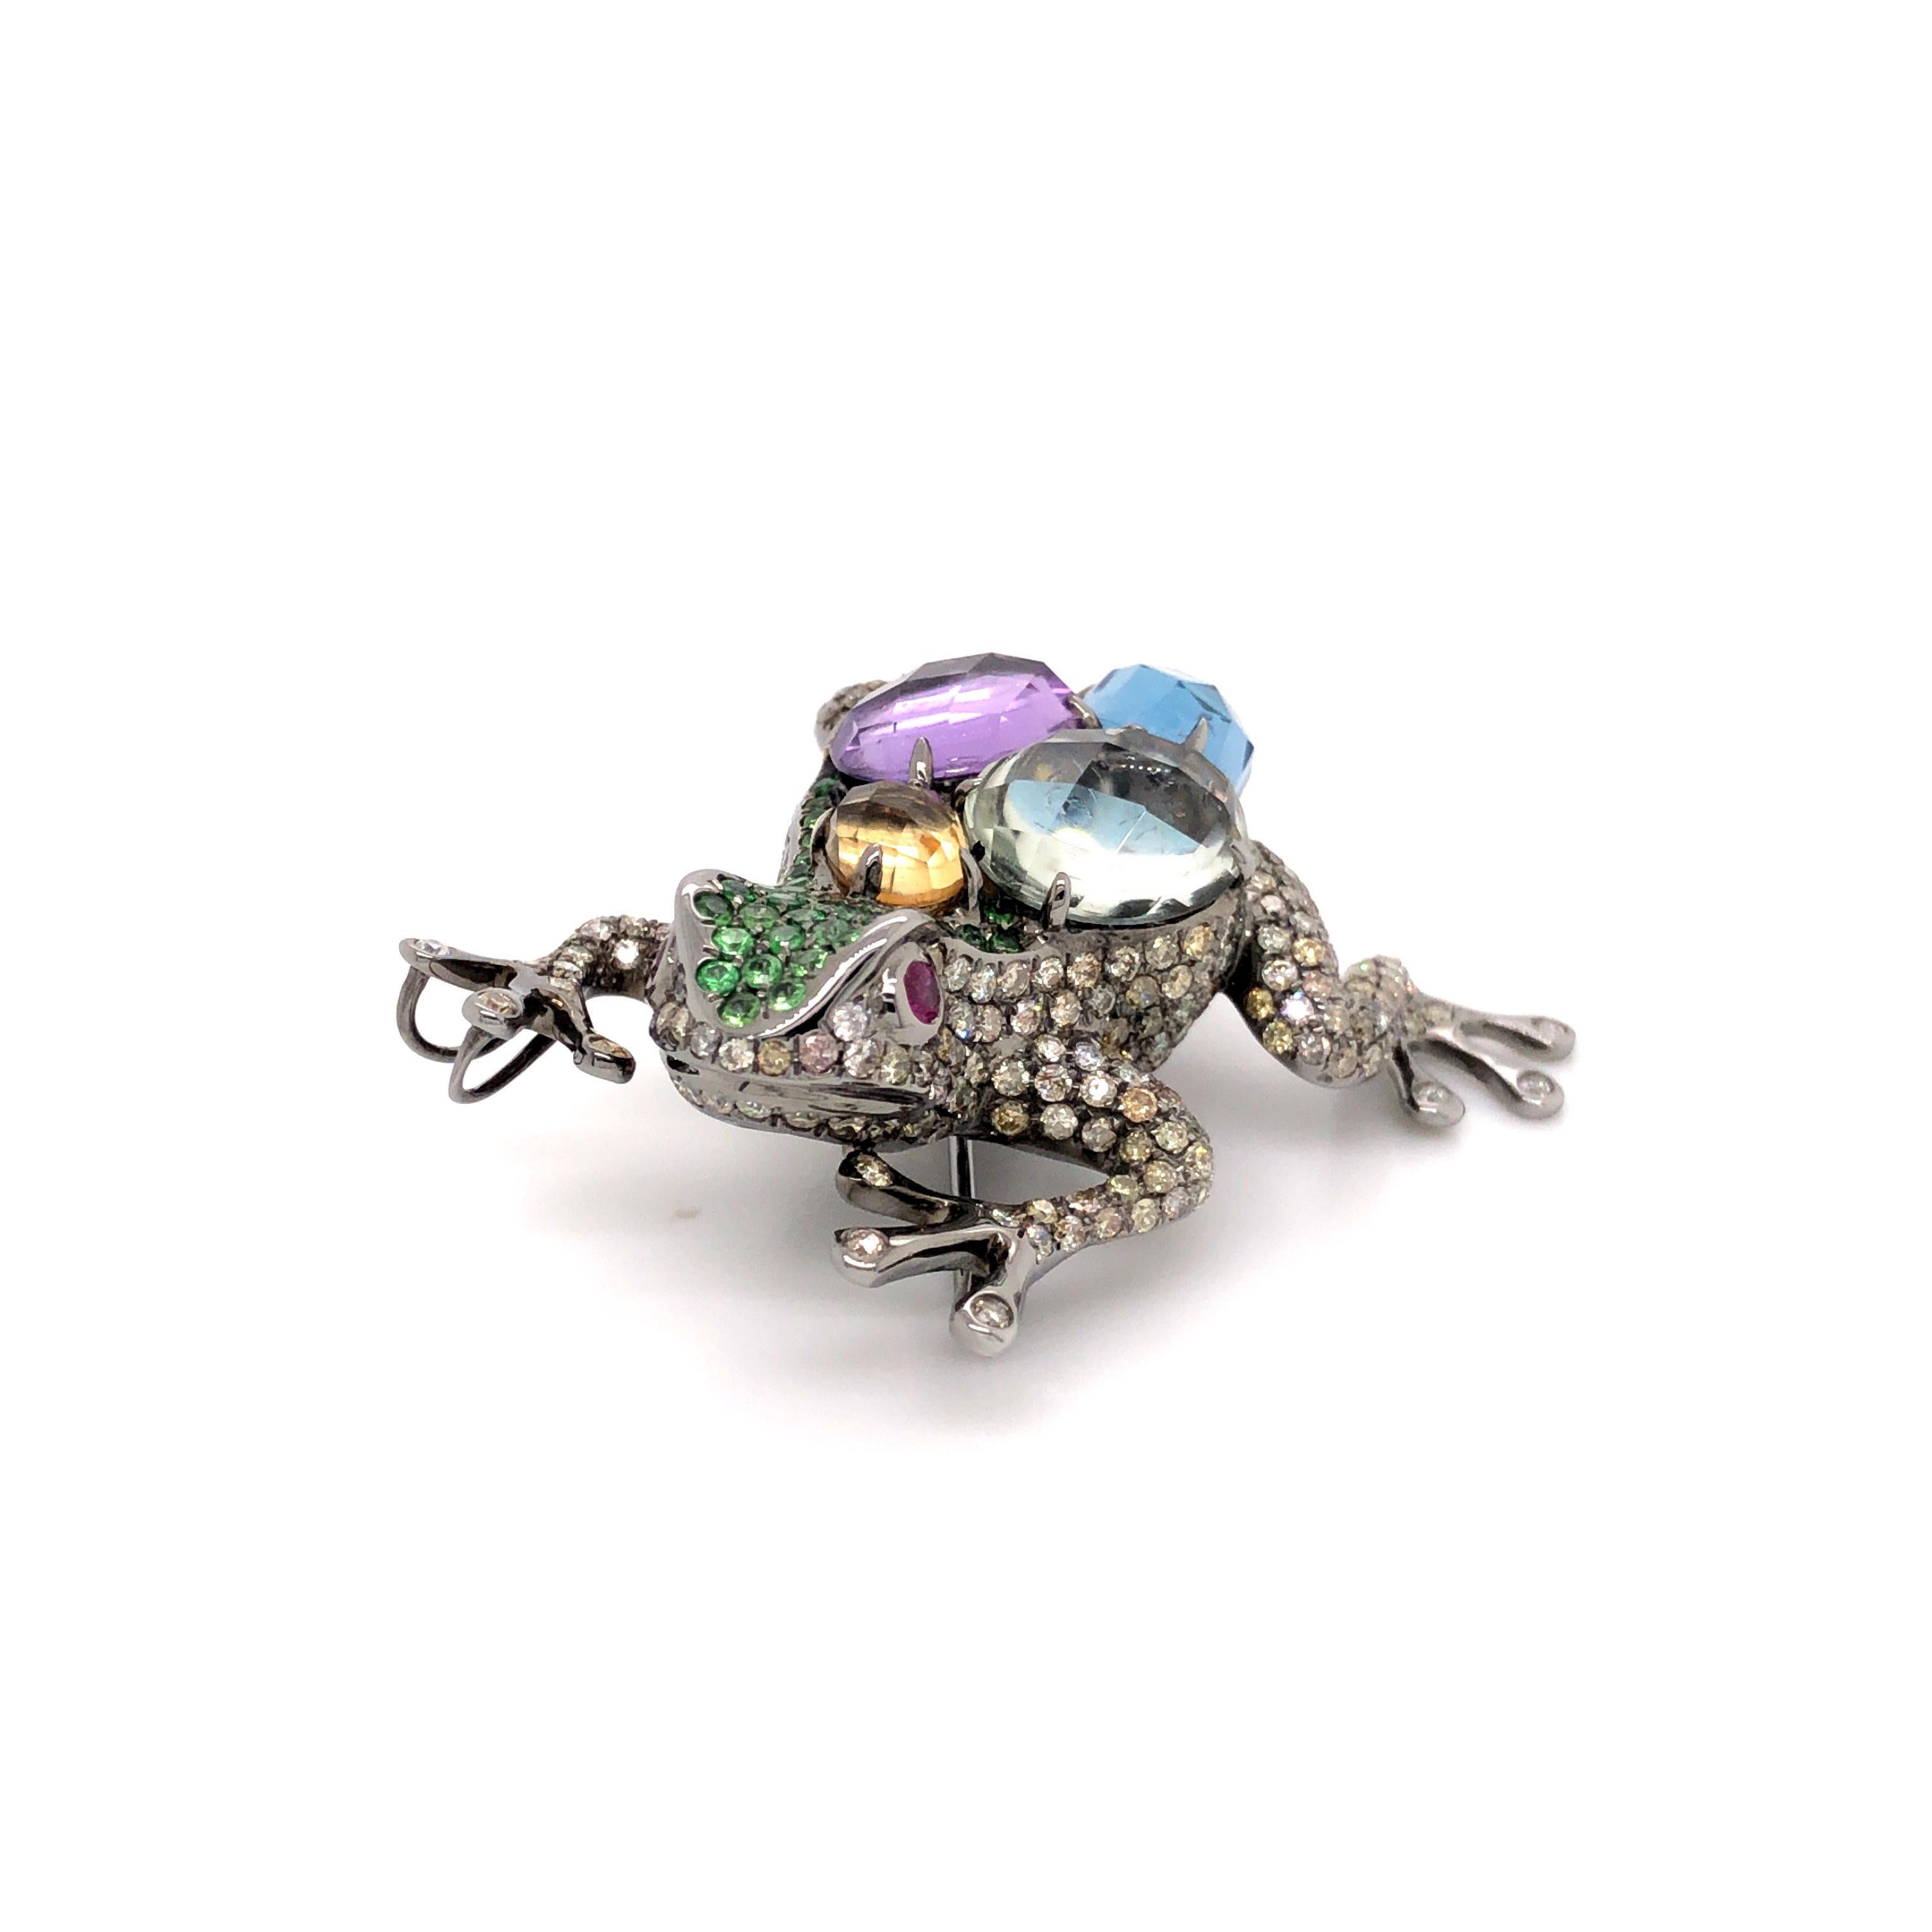 The Diamond Tsavorite and Ruby Multi-coloured Back Frog Pendant and Brooch is a whimsical and captivating piece that captures the spirit of nature in a unique way. The pendant and brooch features an intricately designed frog with a multi-coloured